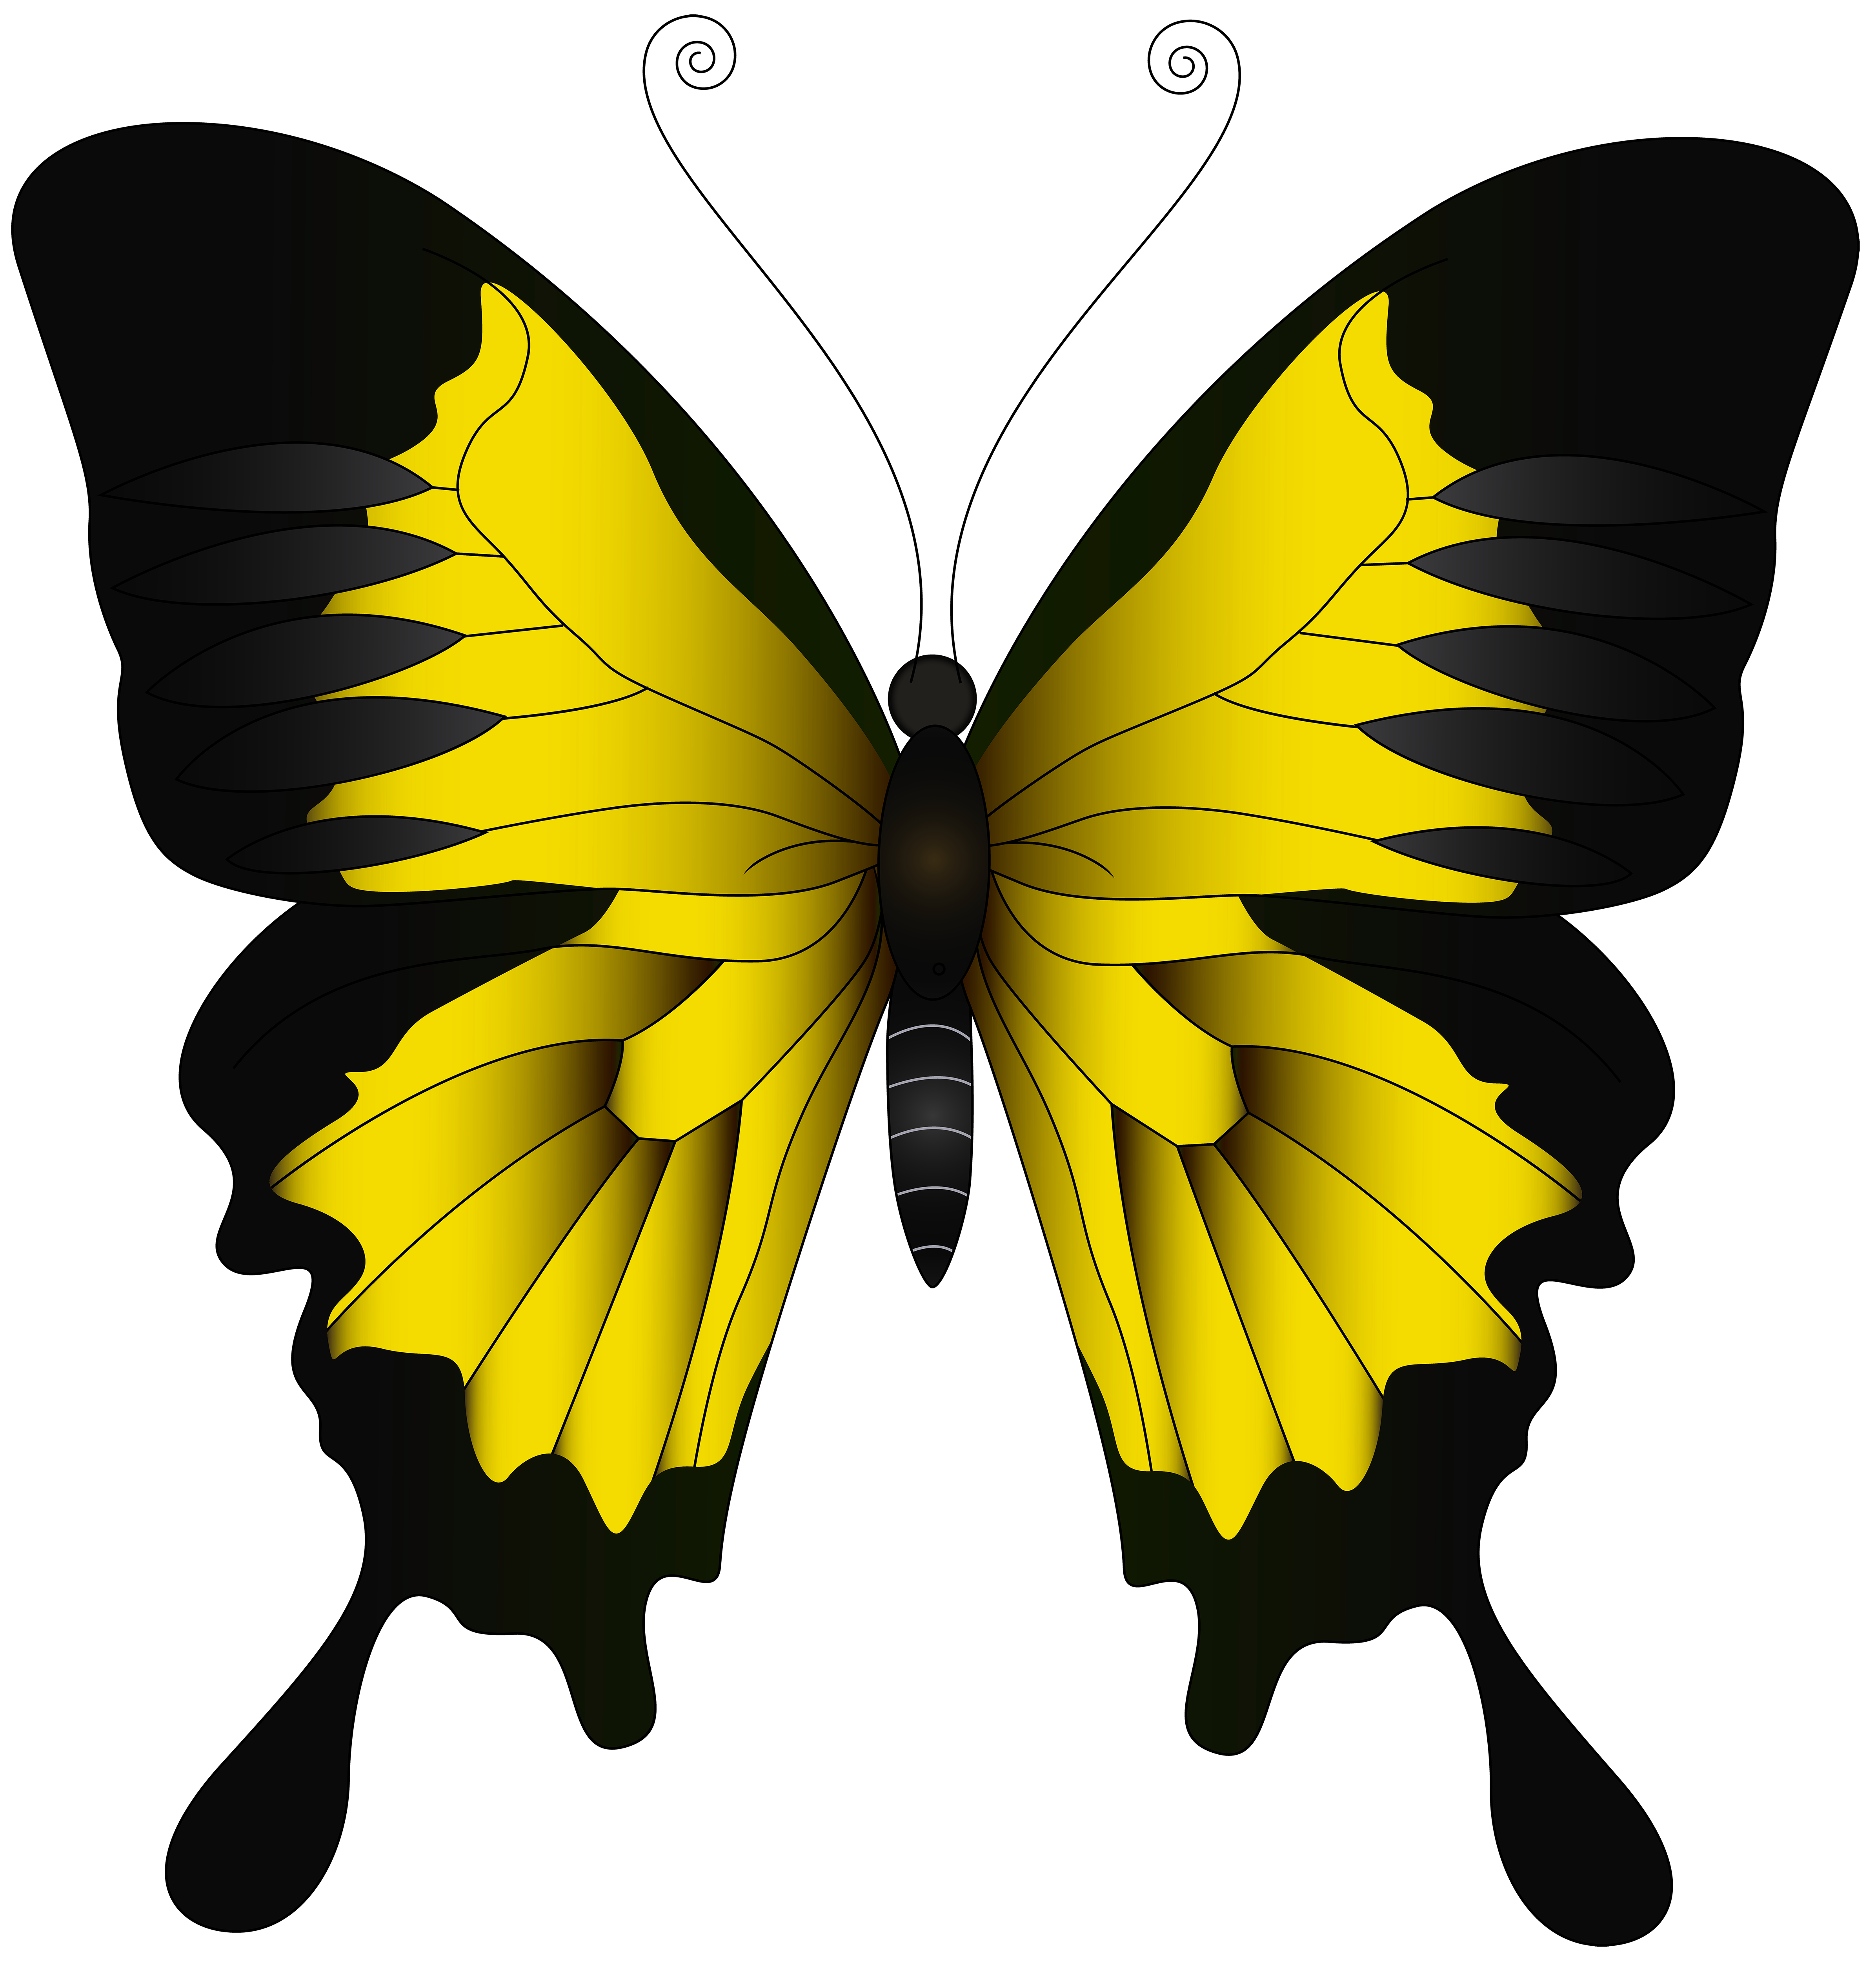 Yellow Butterfly PNG Clip Art Image | Gallery Yopriceville - High ...